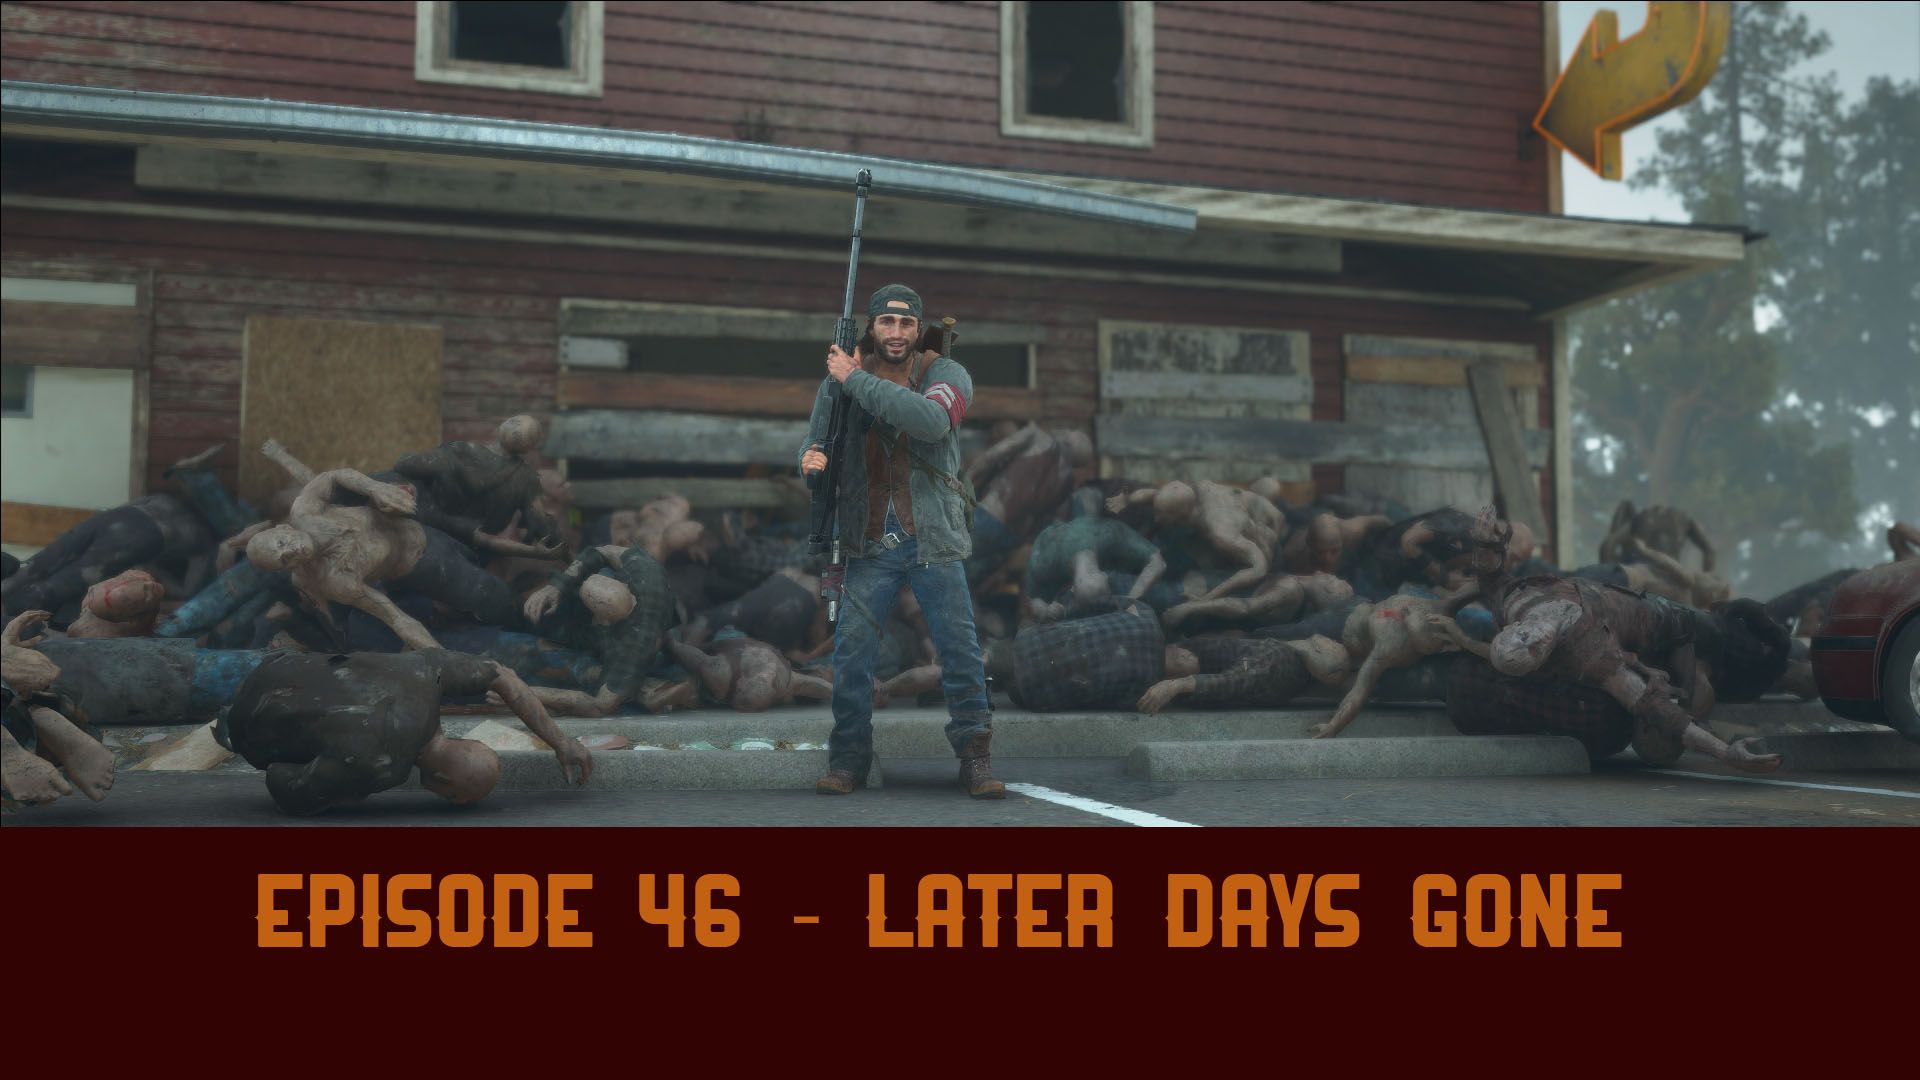 Episode 46 - Later Days Gone